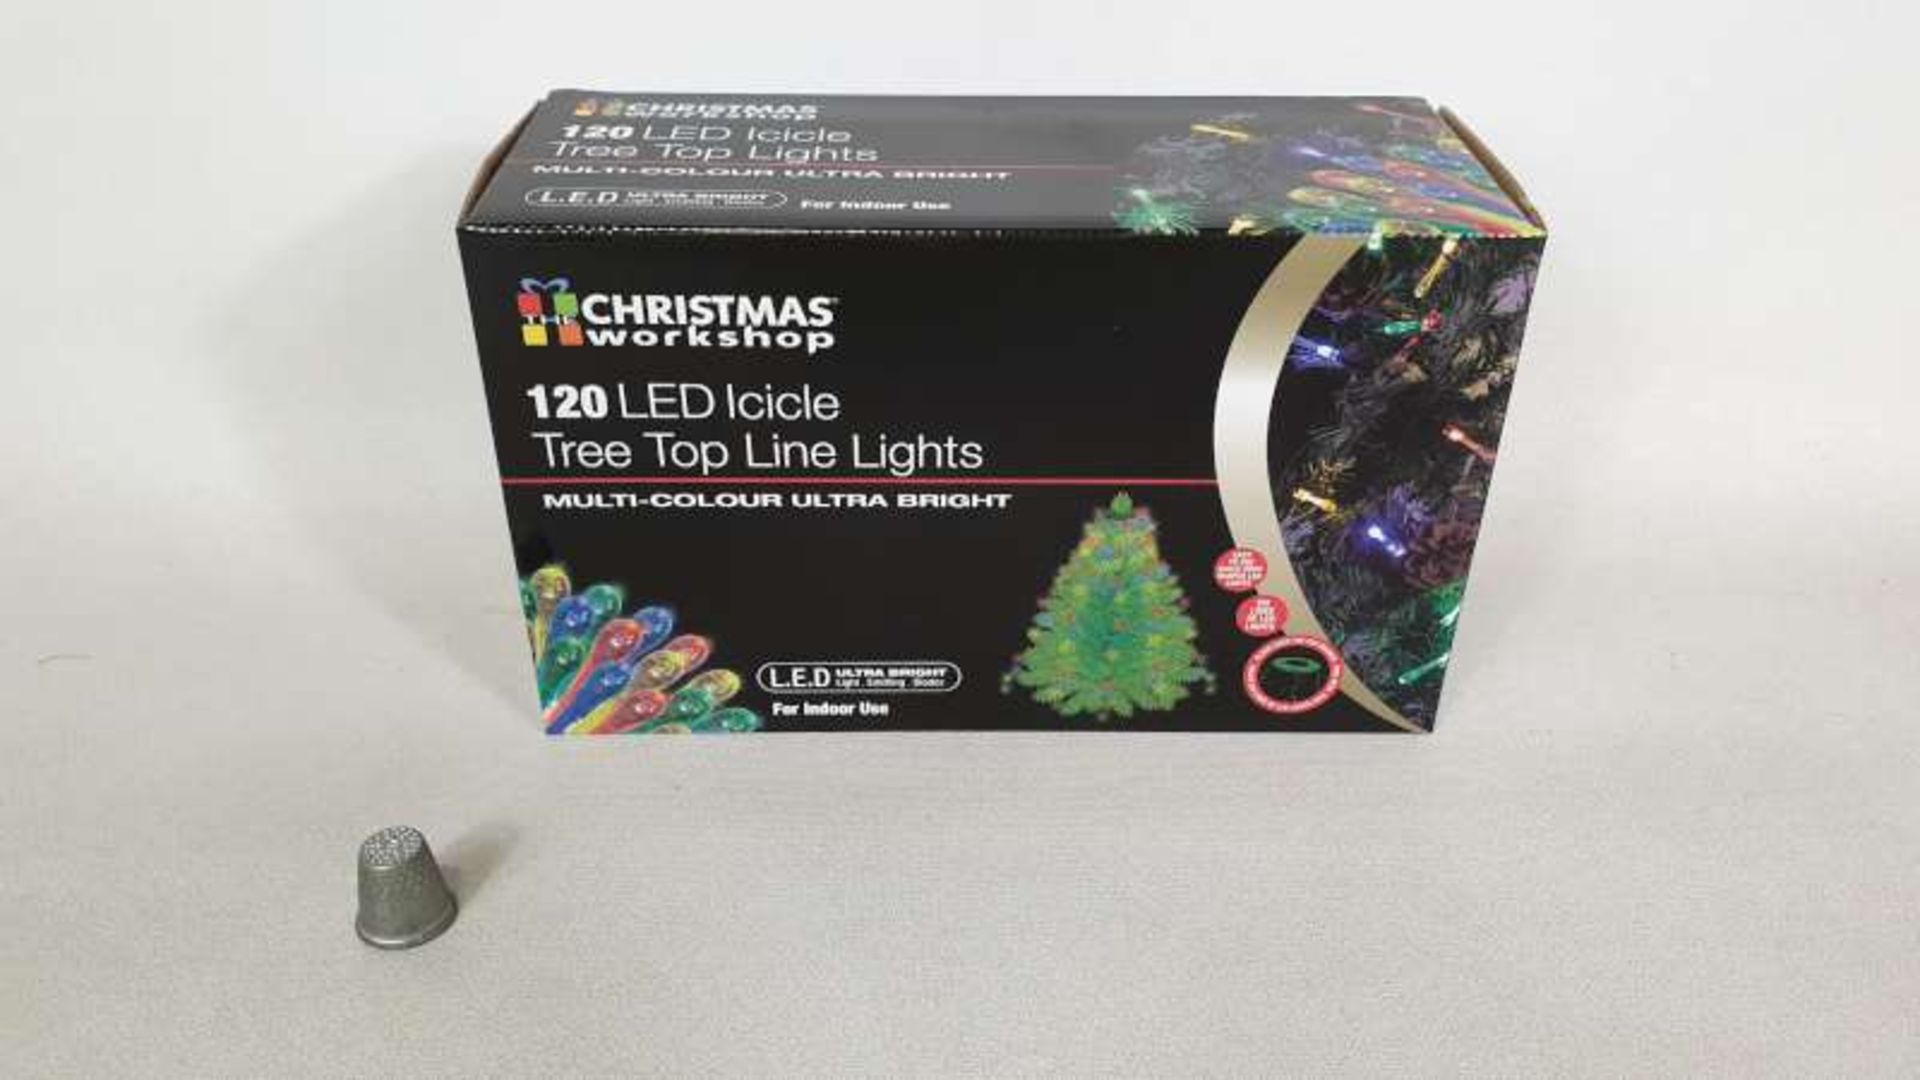 24 X 120 X LED ICICLE MULTI COLOURED TREE TOP LINE LIGHTS IN 2 BOXES